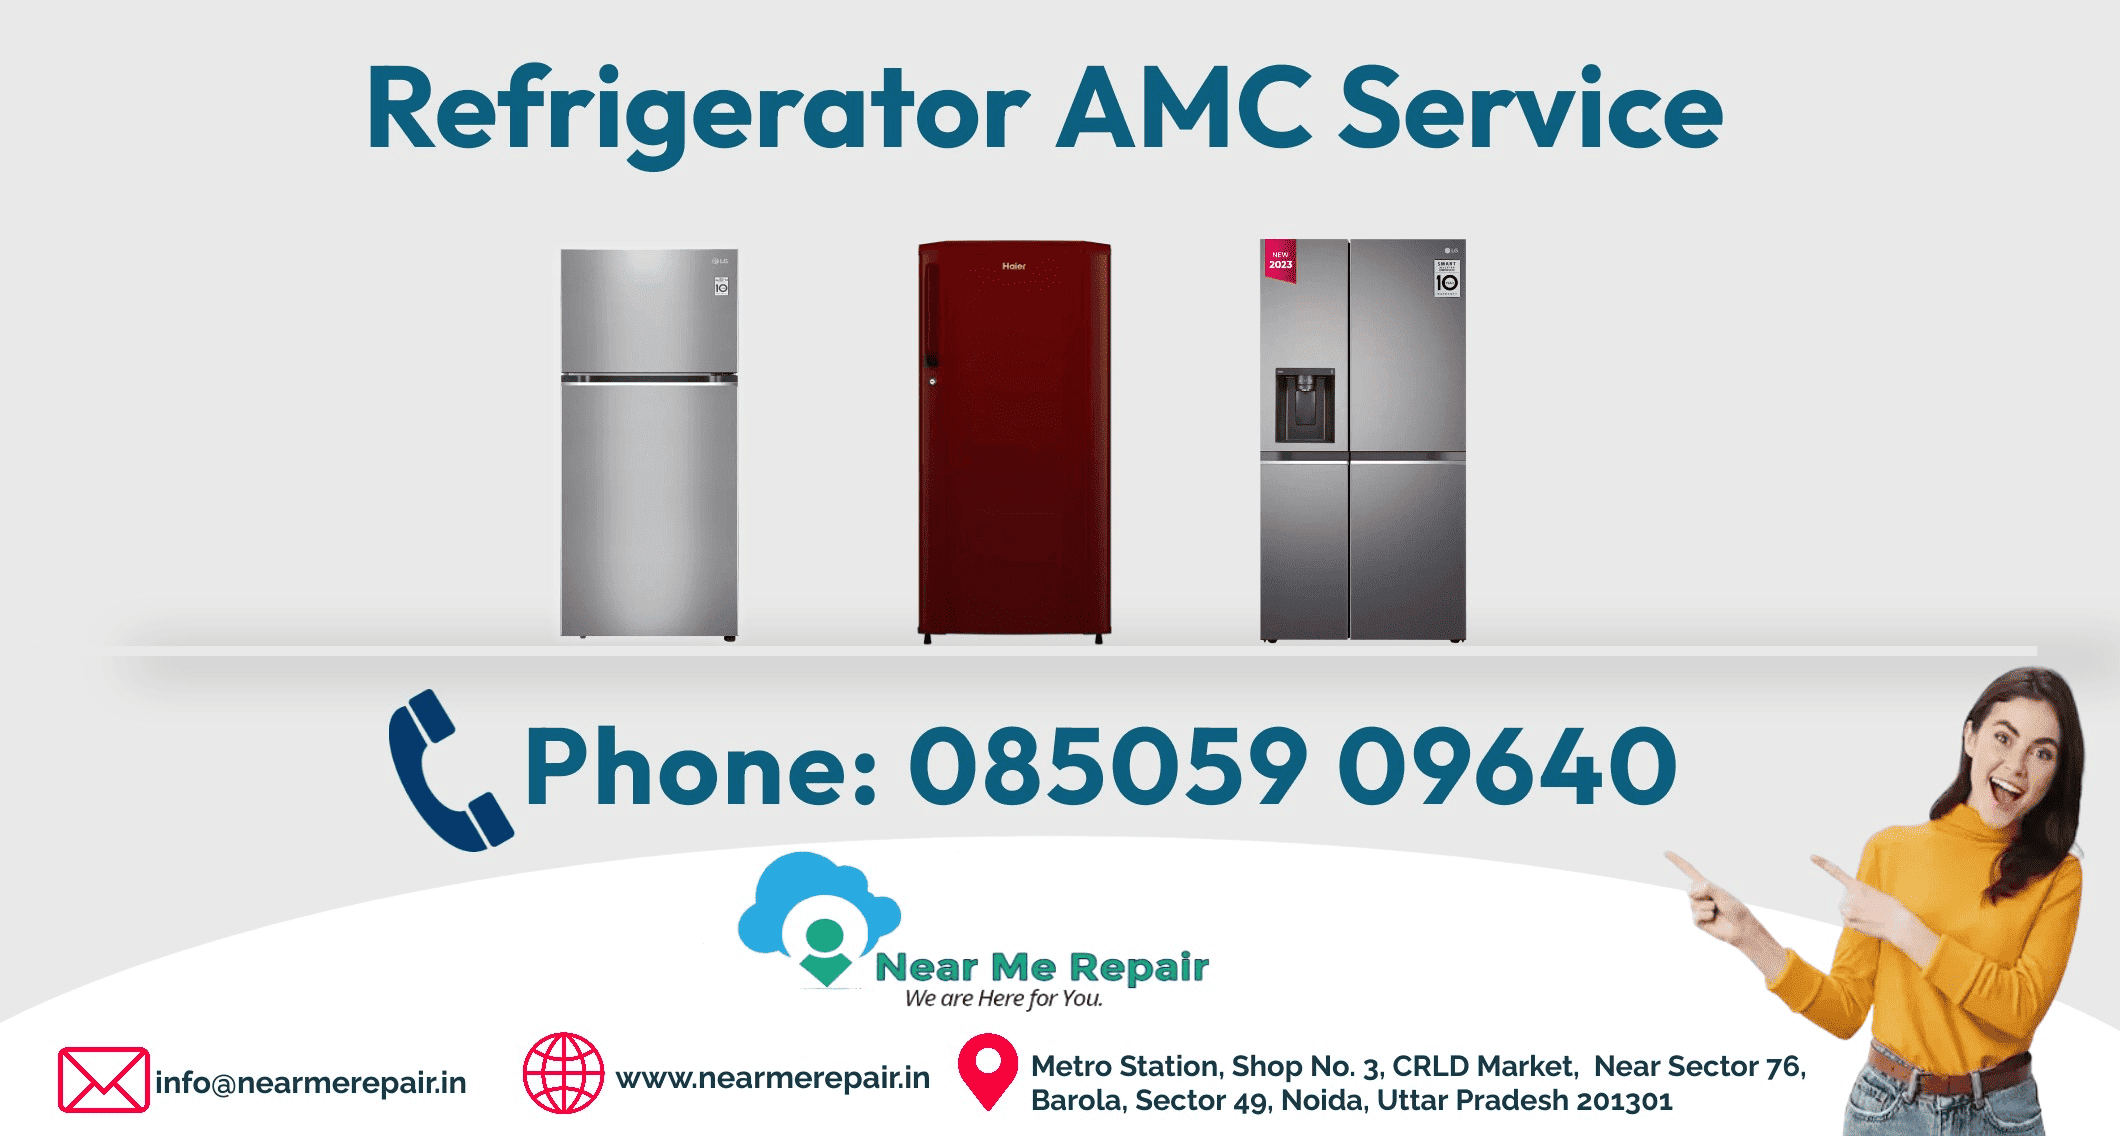 Ensure your fridge's peak performance with our top-rated Refrigerator AMC services near Delhi-NCR, delivering unbeatable cooling excellence.